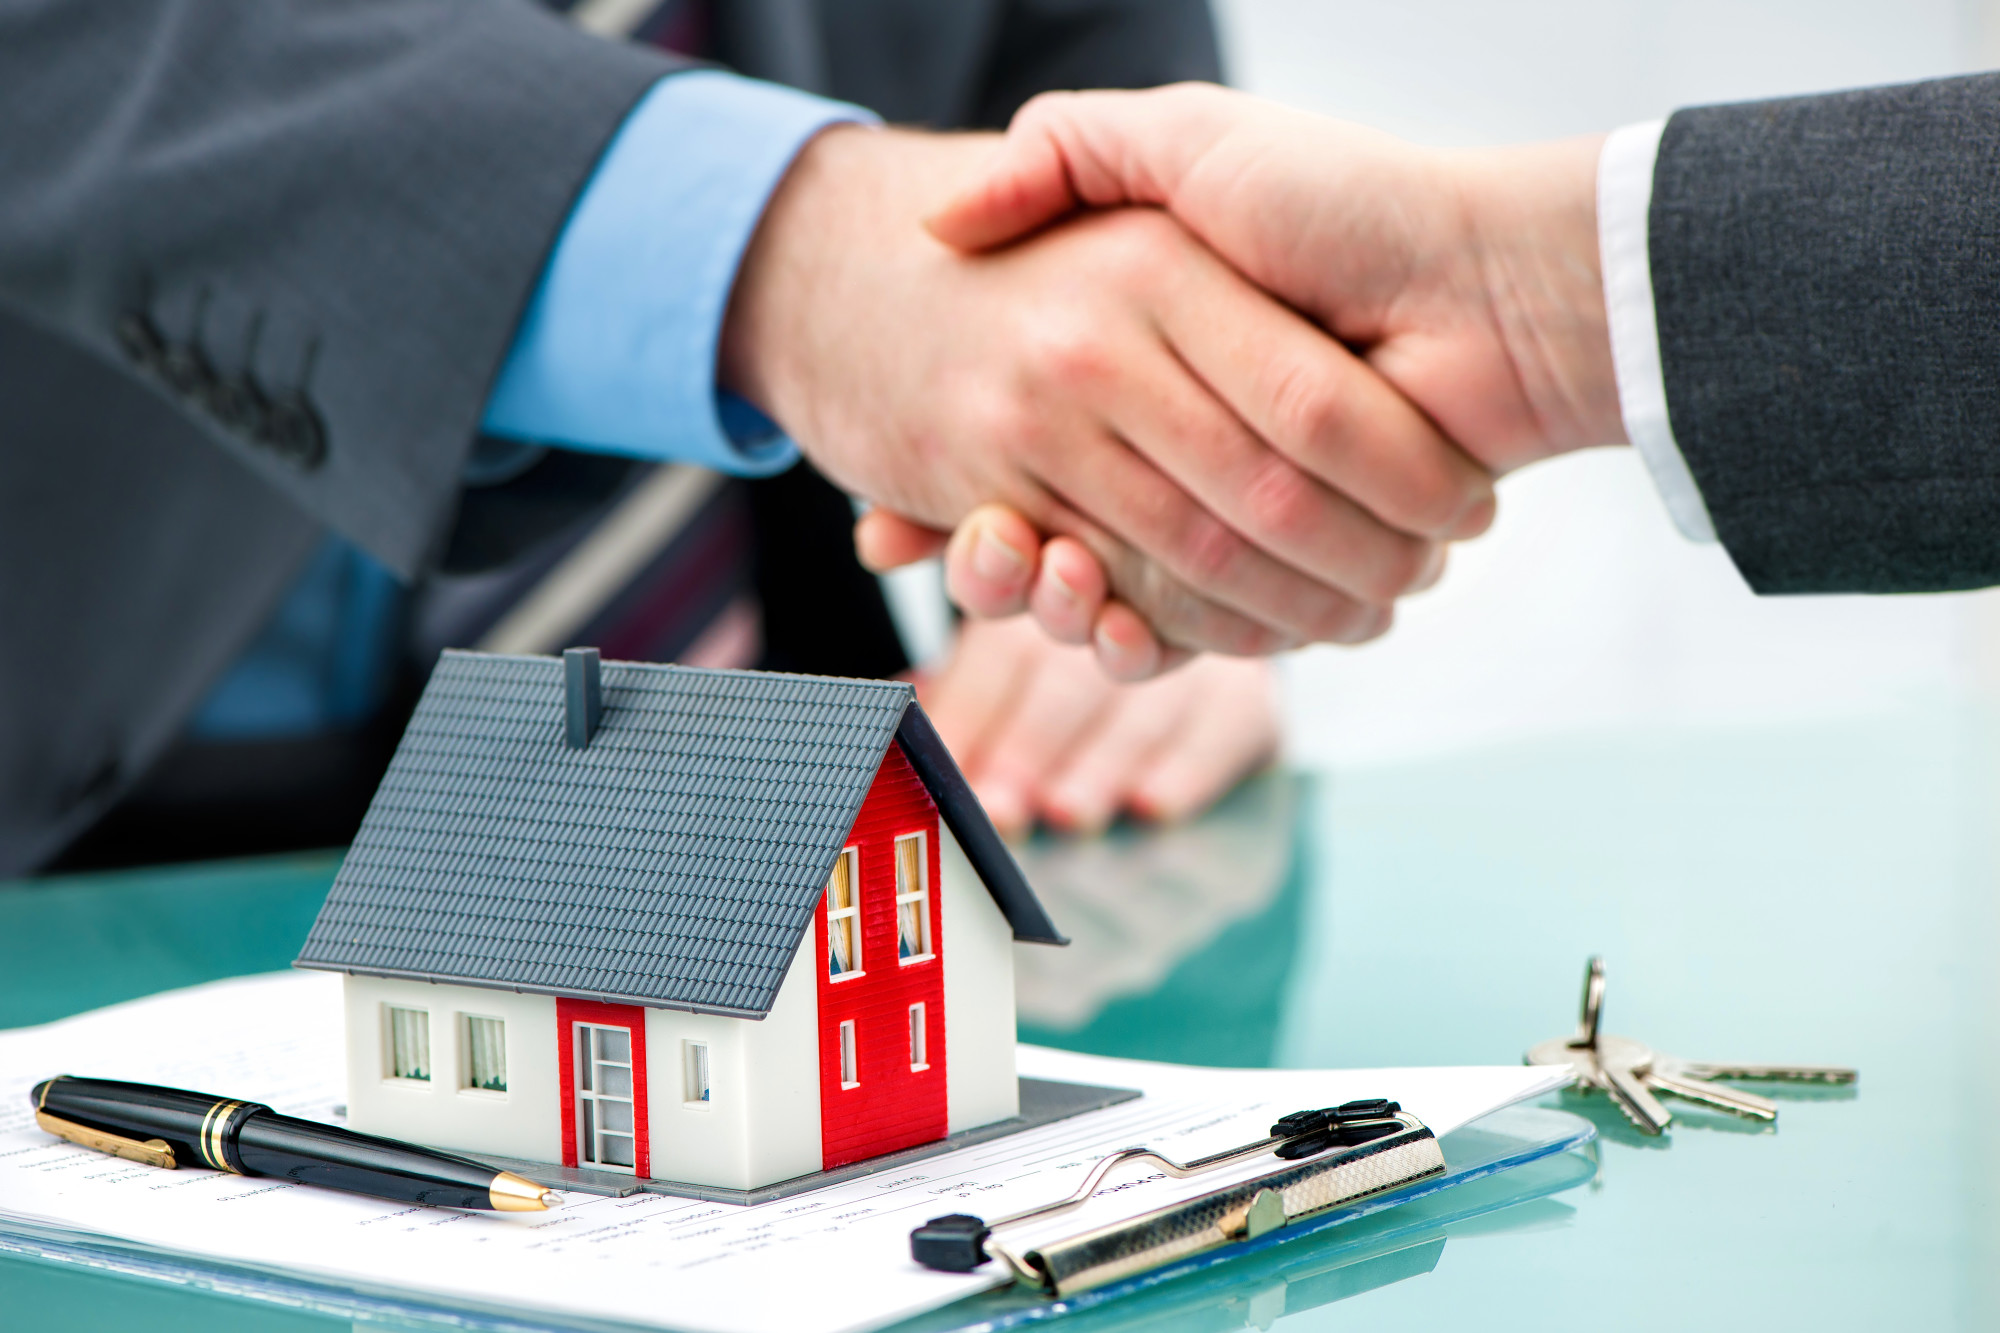 Become a Property Manager: The 4 Best Types of Properties to Invest In